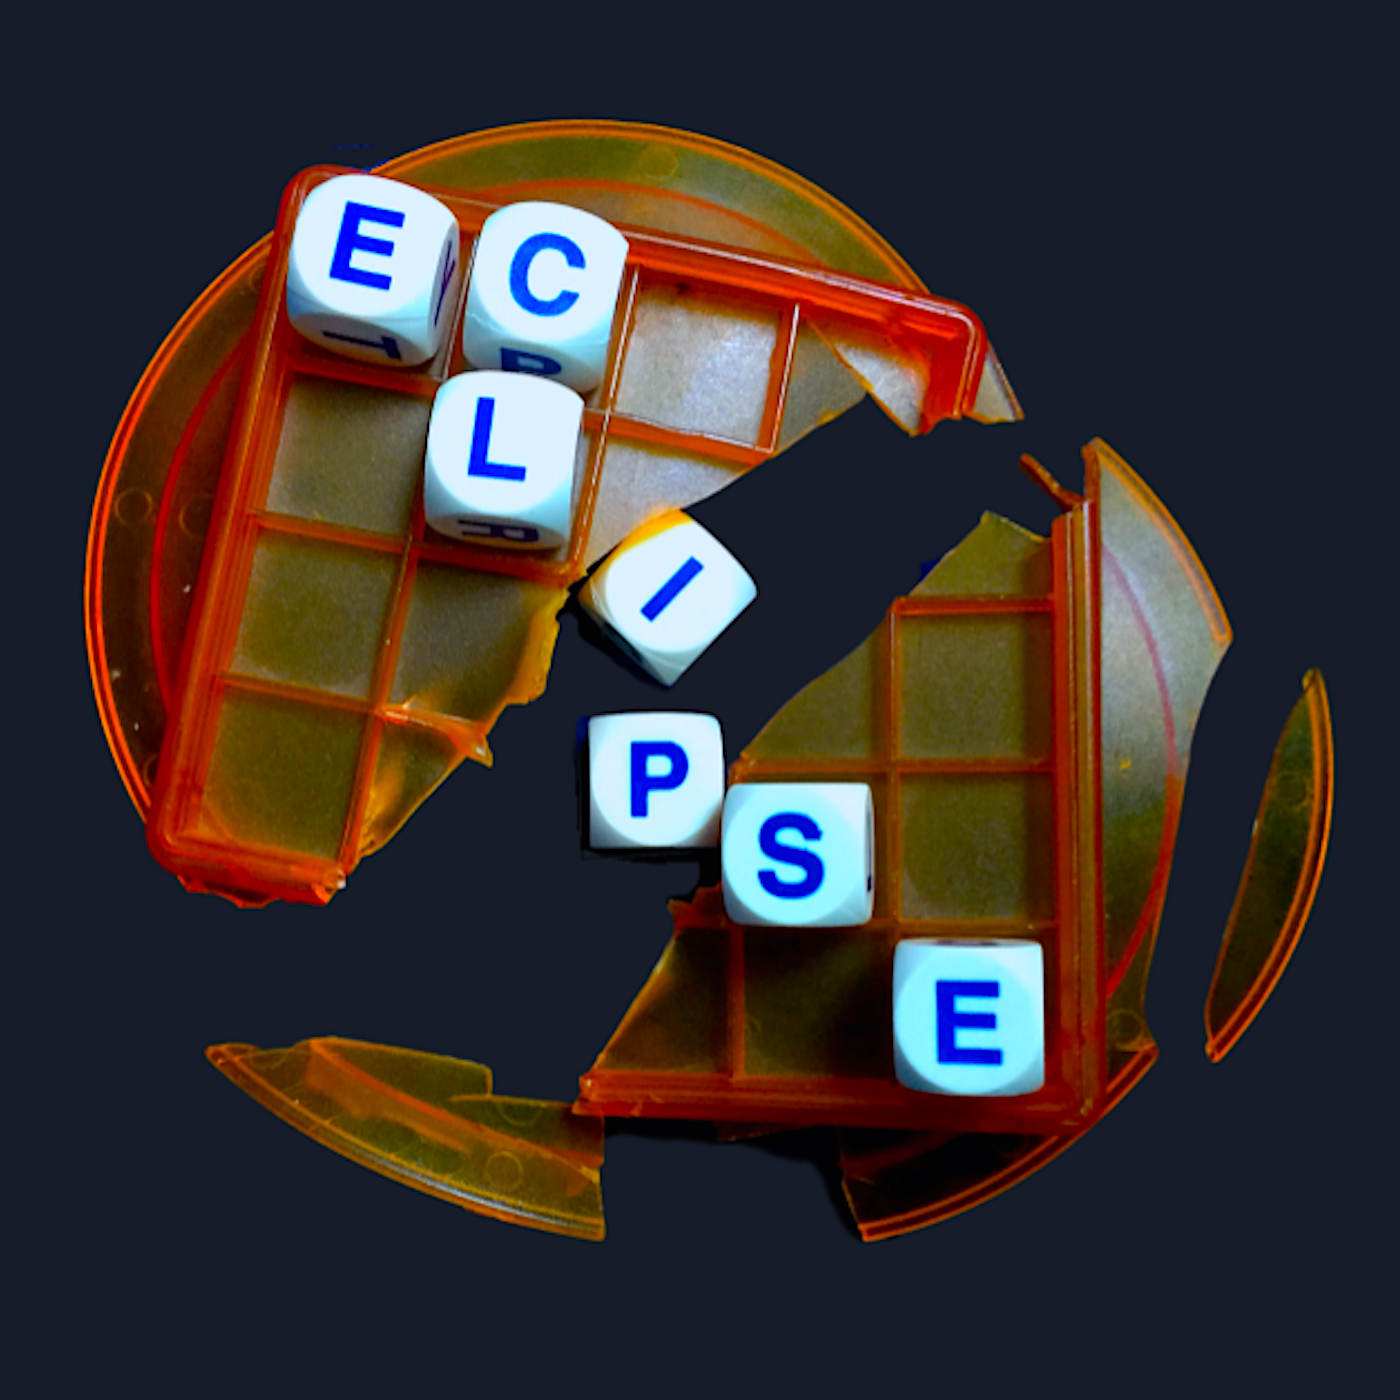 Thumbnail for "Eclipse+".